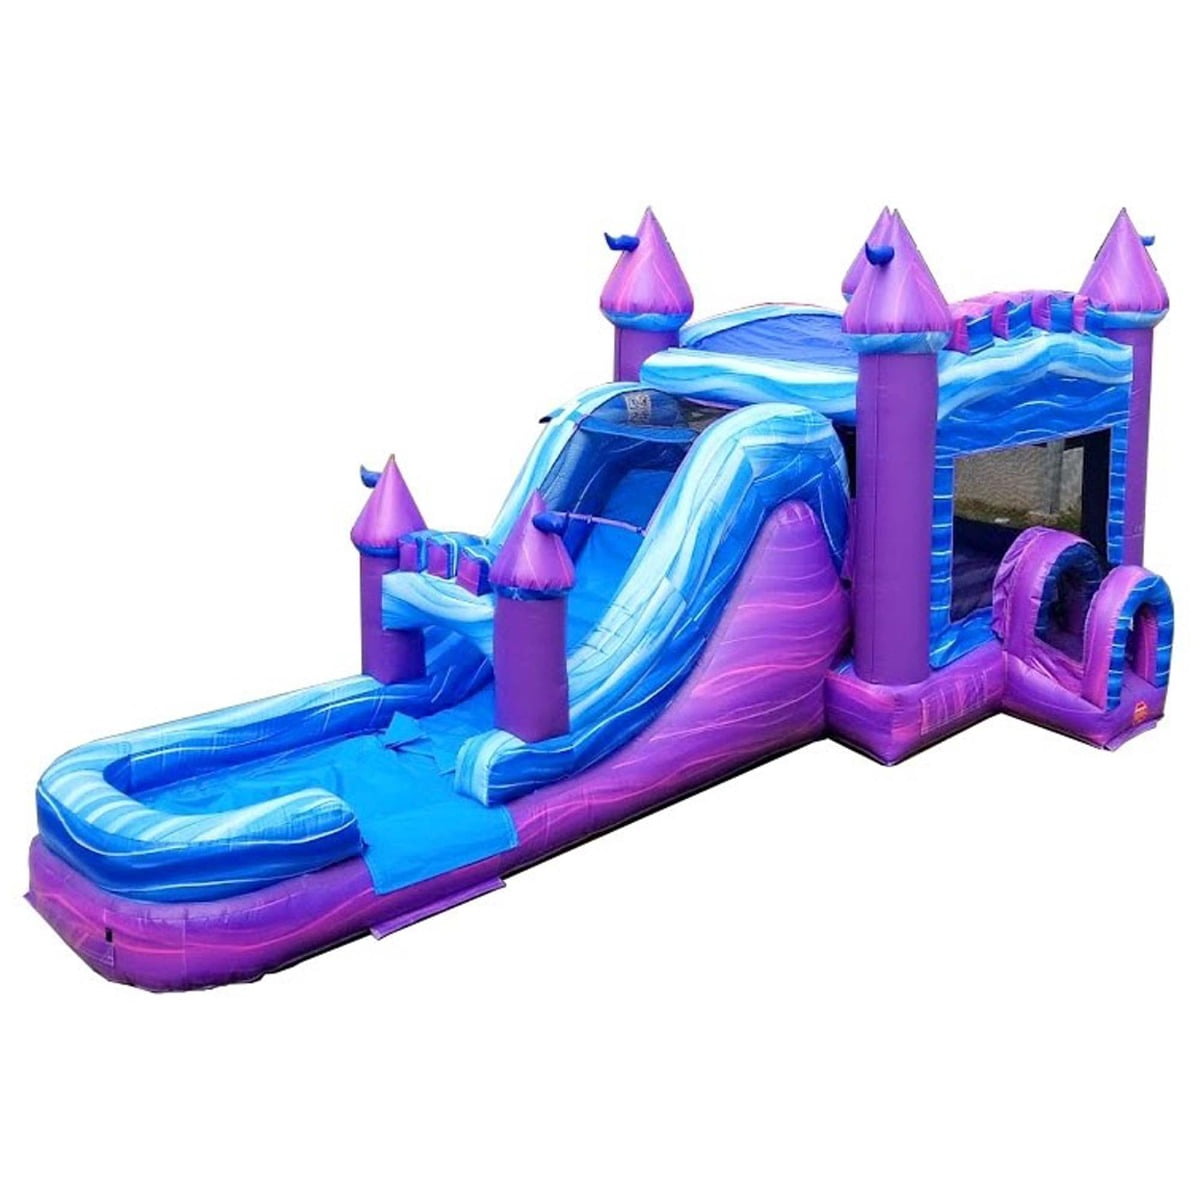 Blower and Stakes Included 32-Foot Long by 16-Foot Wide by 16-Foot Tall Commercial Grade Inflatable Mega Tropical Red Marble Single Lane Wet or Dry Slide & Bounce House Combo